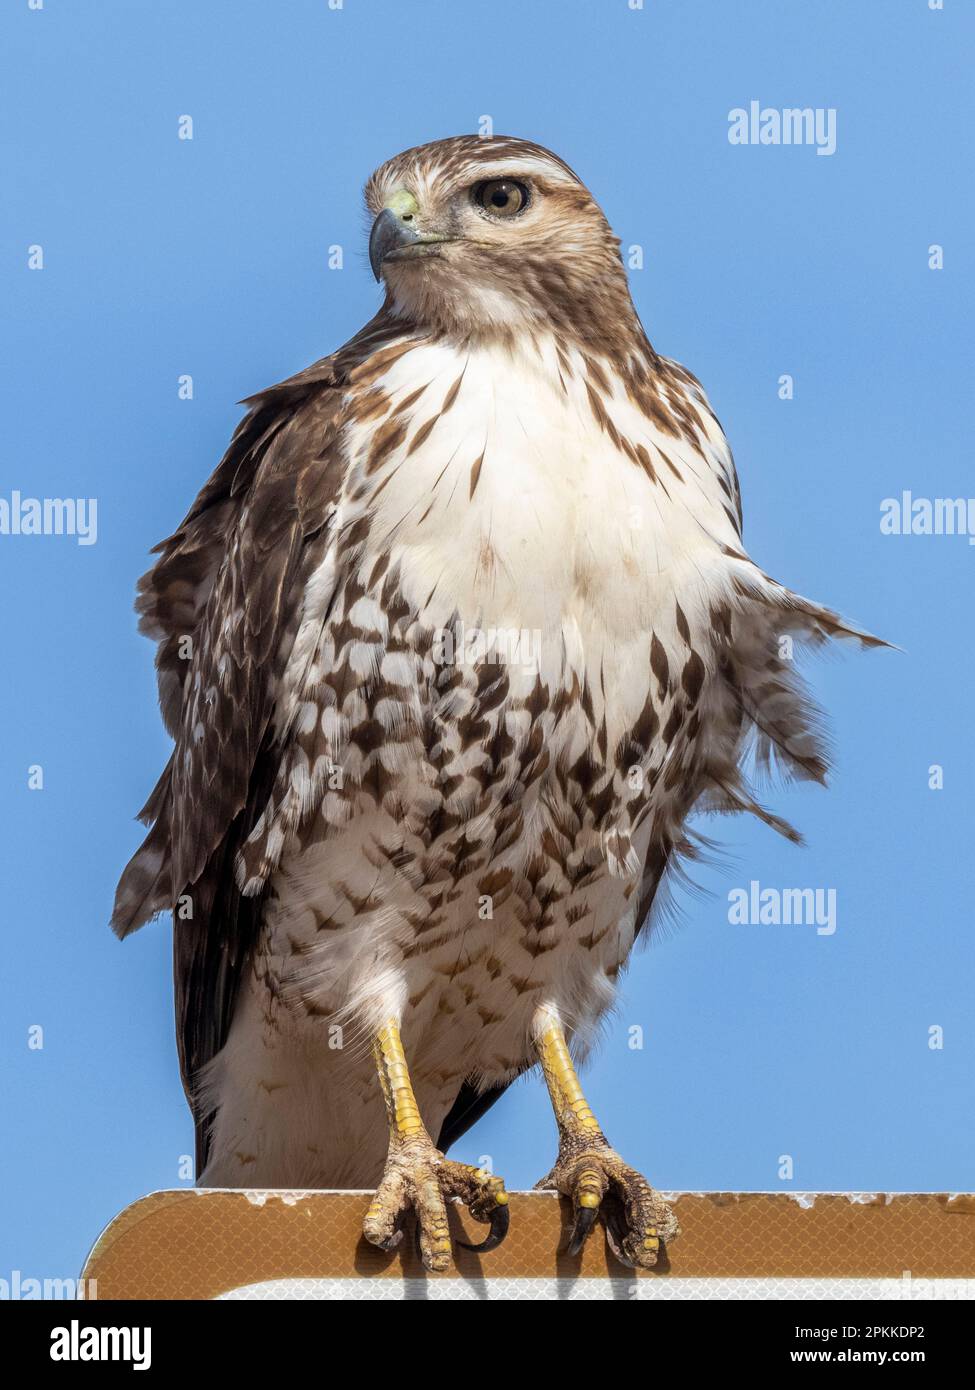 A young red-tailed hawk (Buteo jamaicensis), on a sign near Whitewater Draw, Coronado National Forest, Arizona Stock Photo